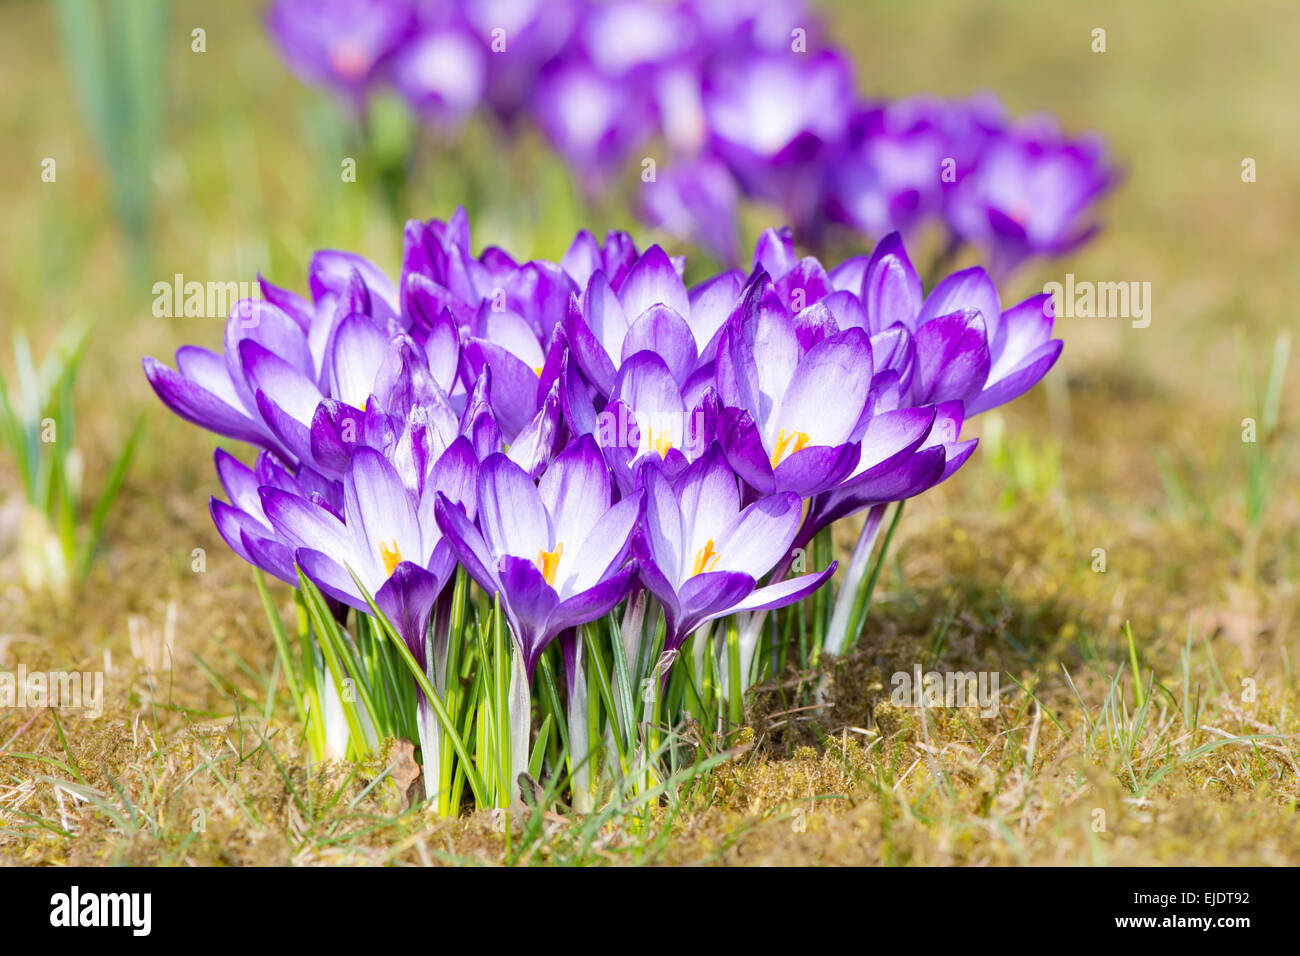 Macro of a group of purple crocus blossoms standing in the meadow Stock Photo